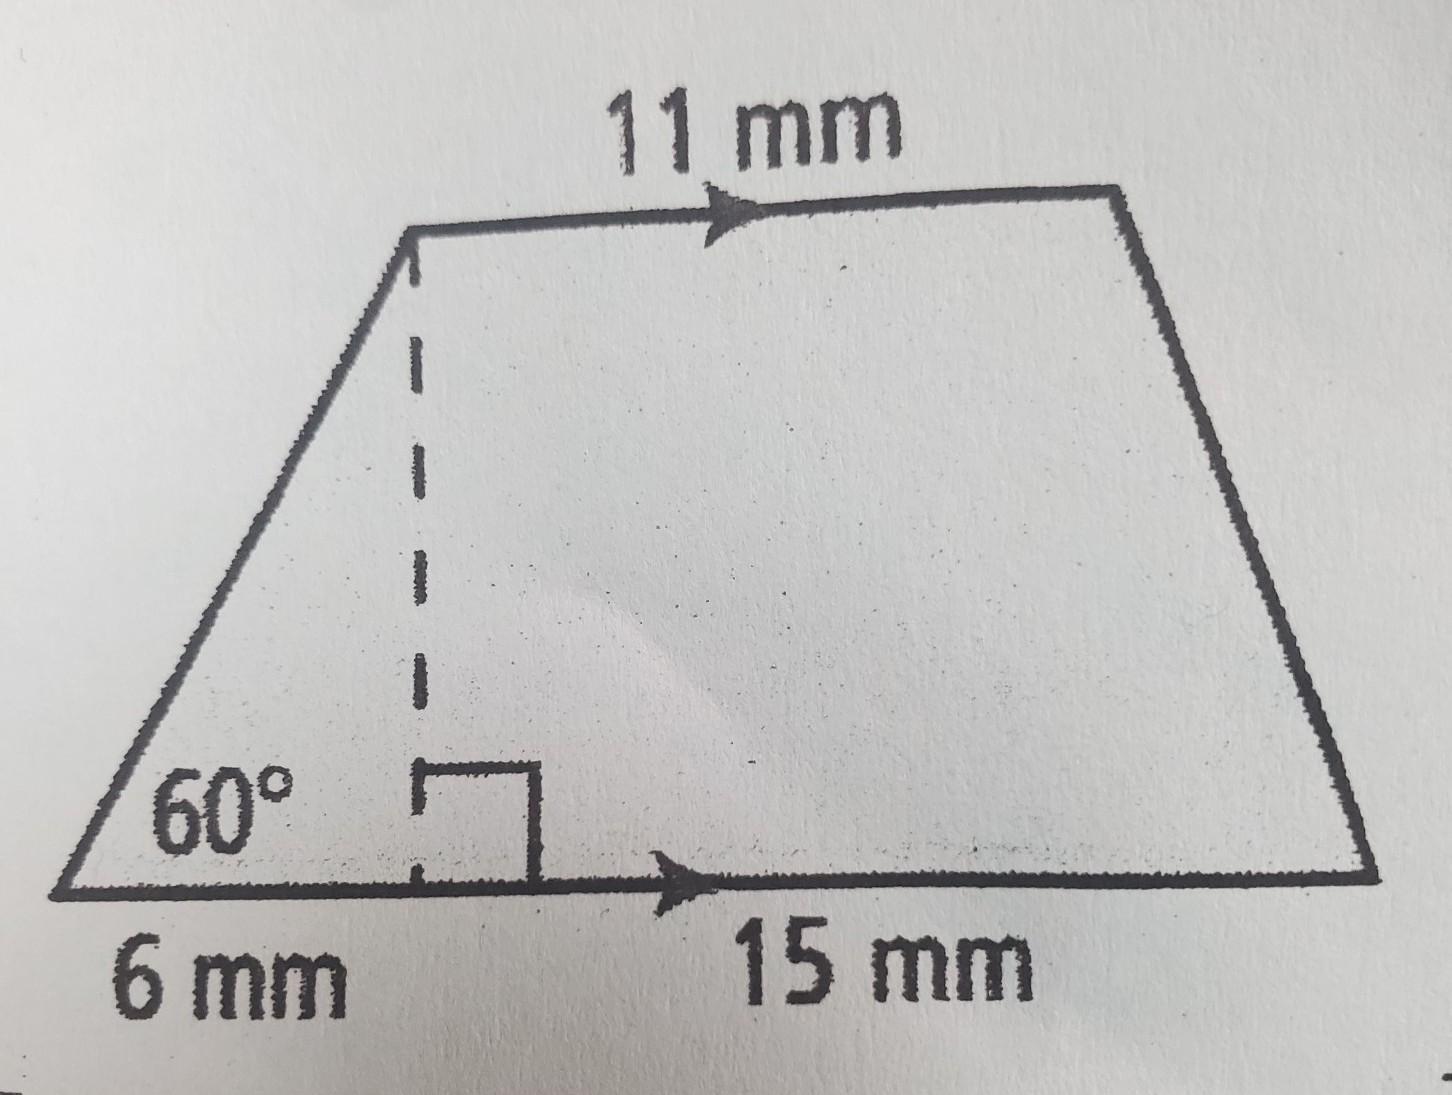 What Is The Exact Area Of The Trapezoid?